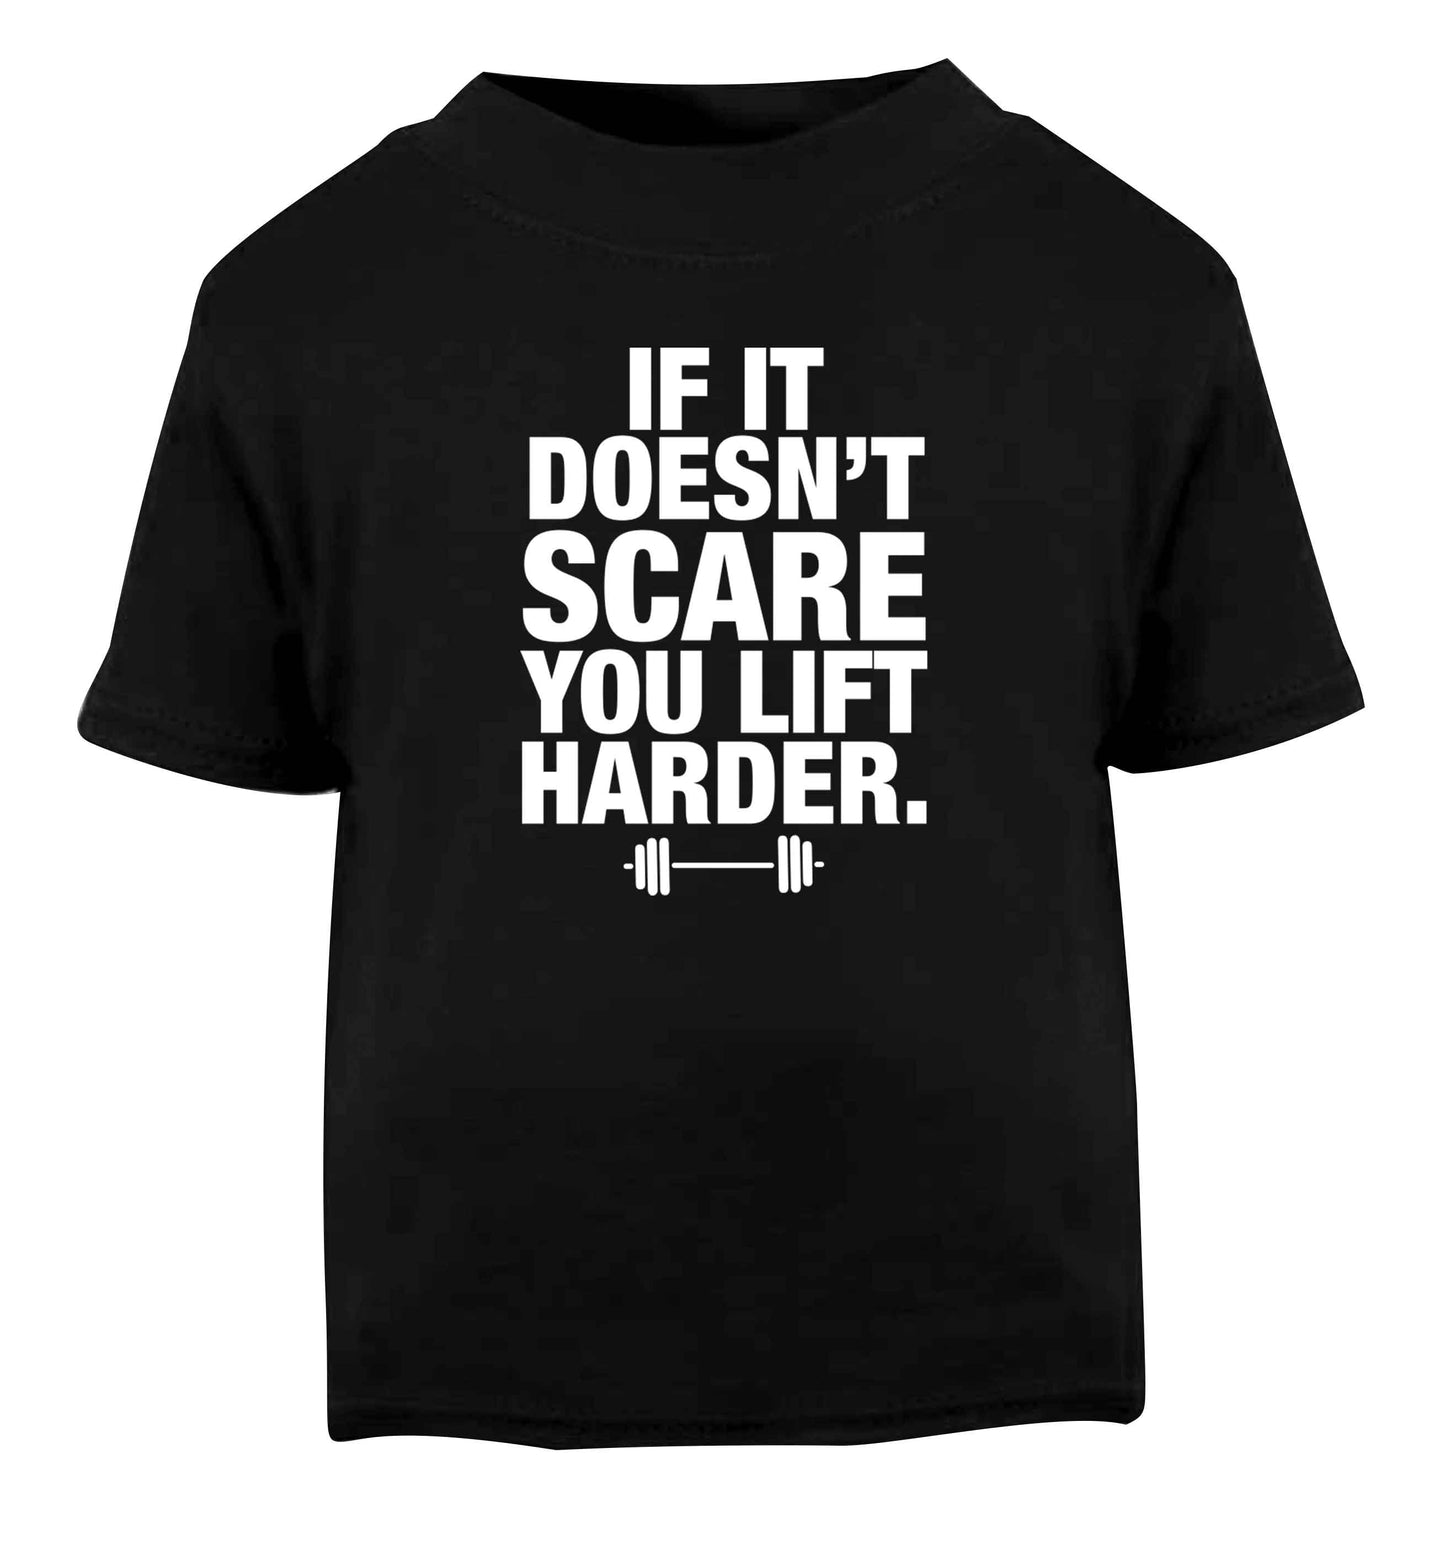 If it doesnt' scare you lift harder Black Baby Toddler Tshirt 2 years